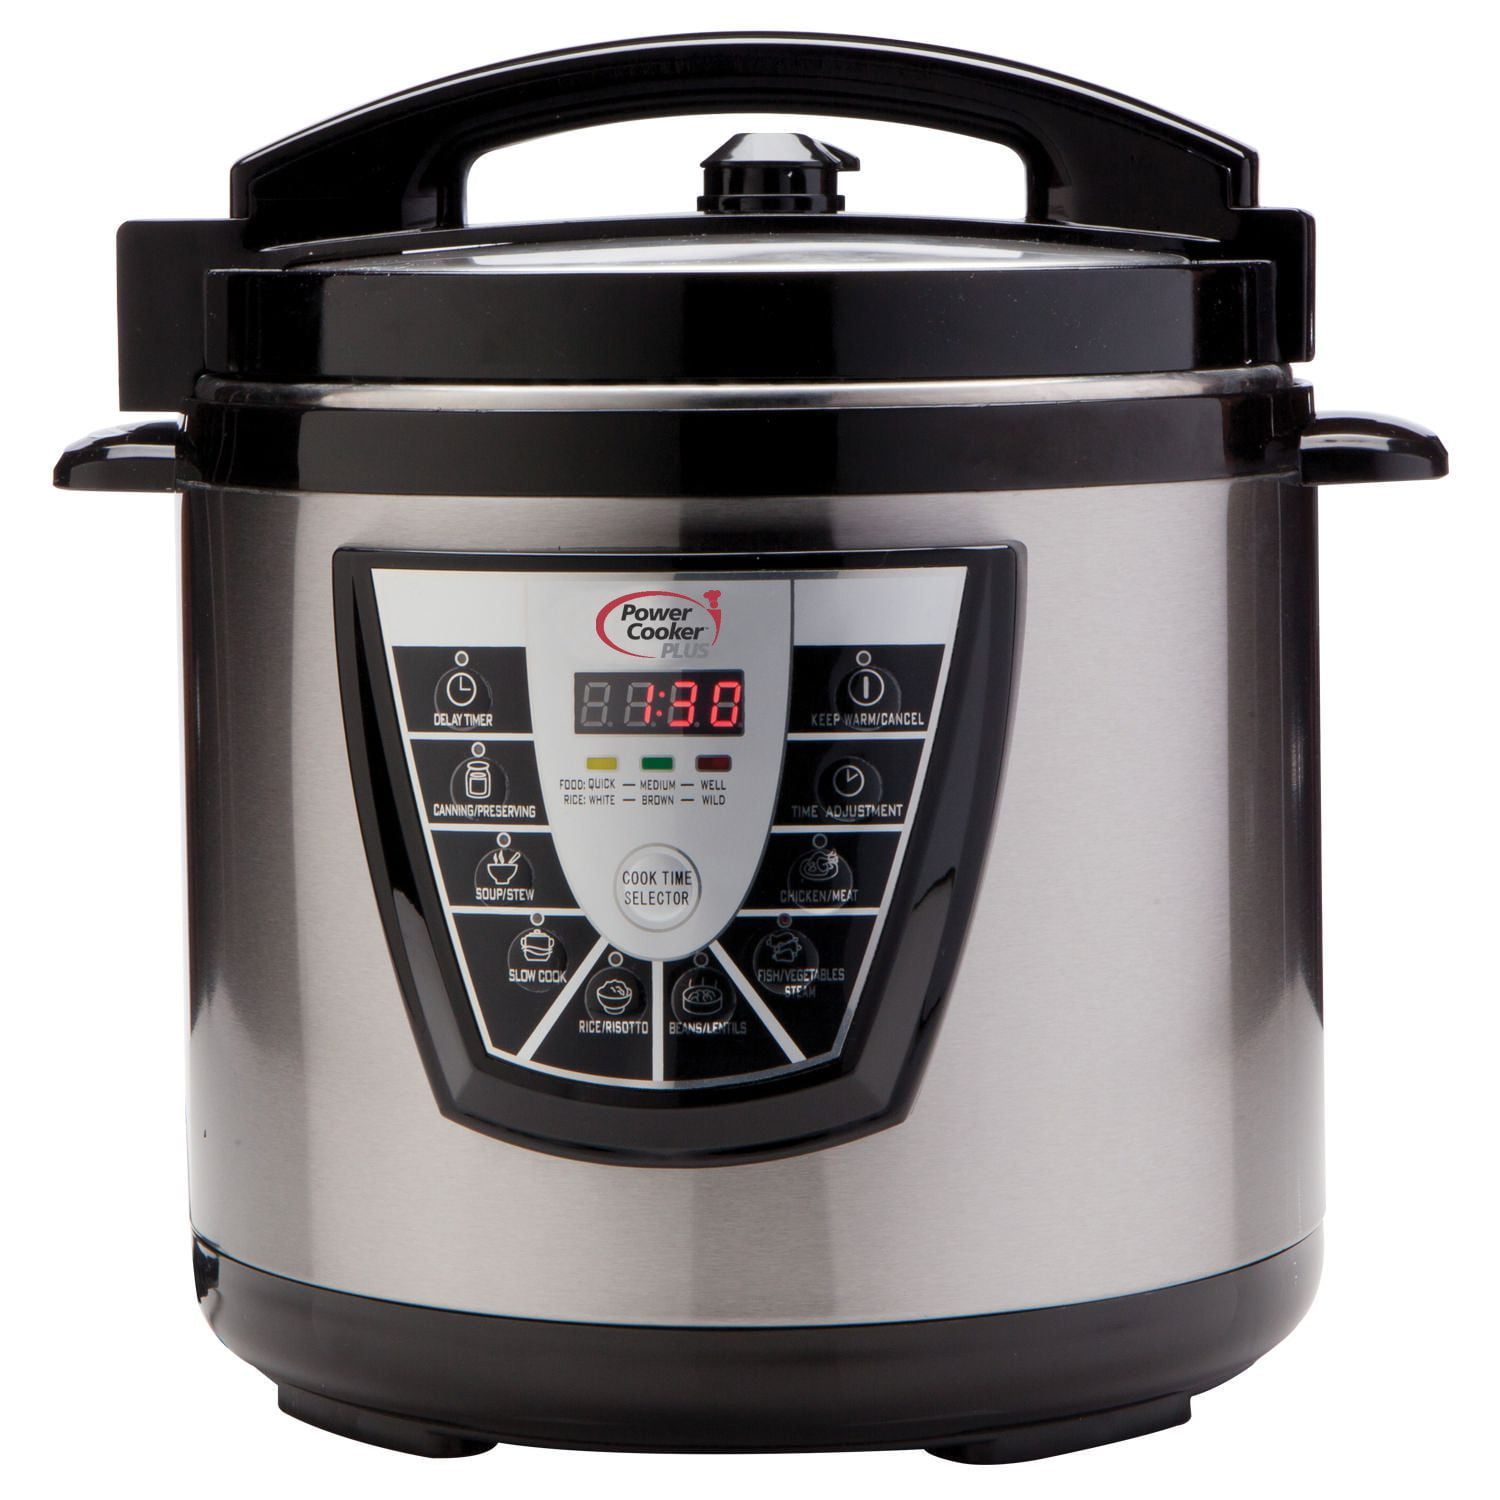 FAGOR DUO 8 pressure cooker 7,5 litres, induction, Express Super